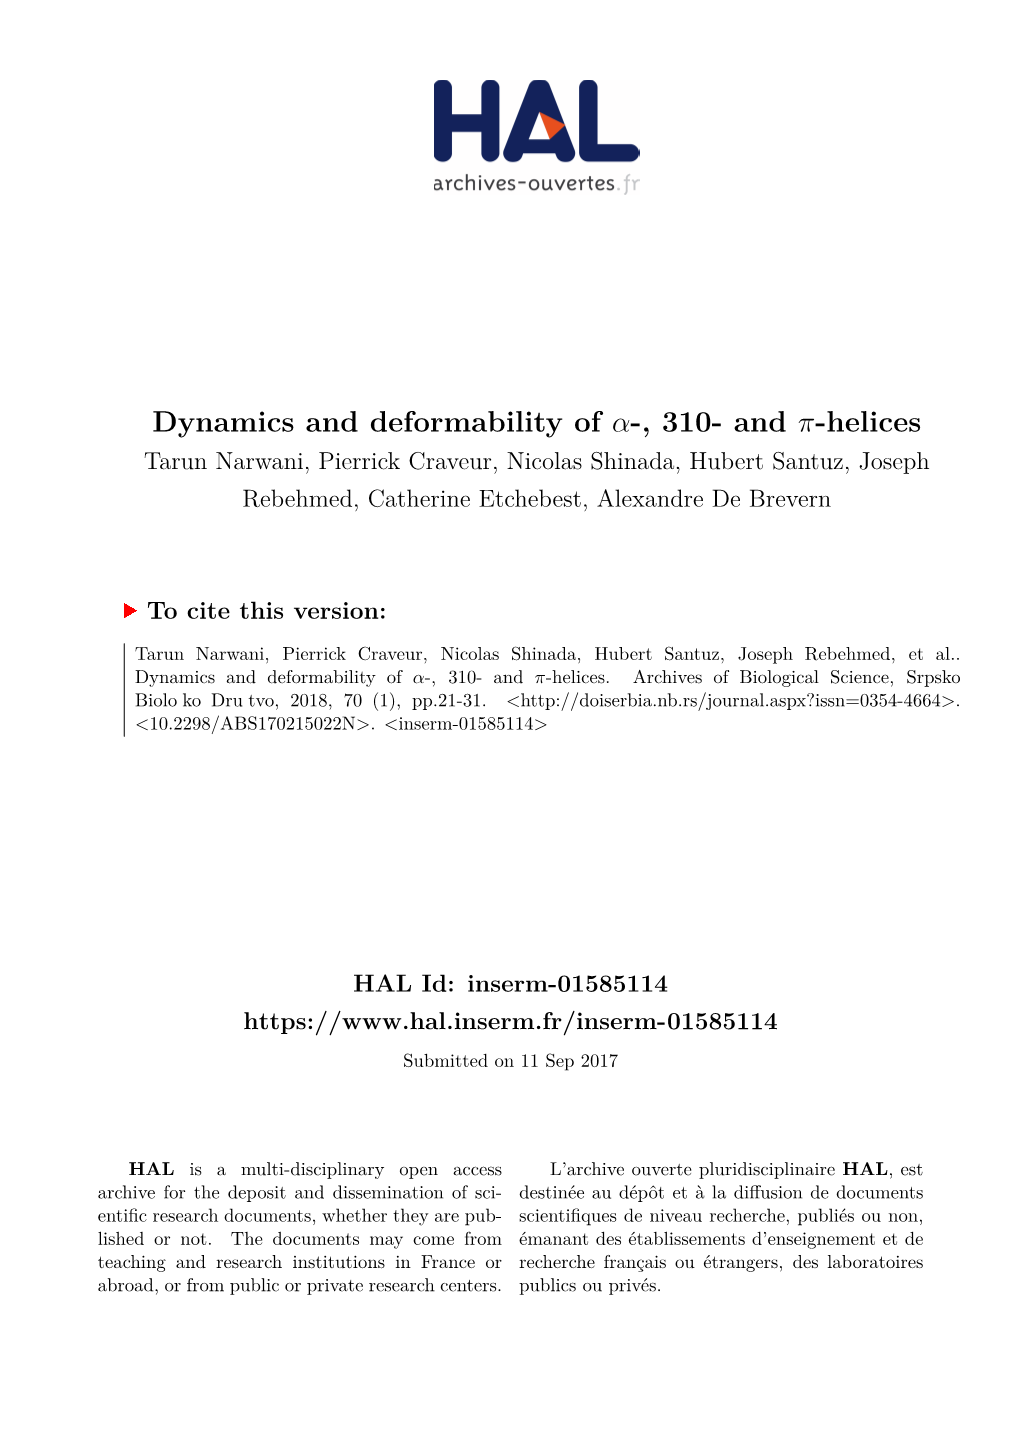 Dynamics and Deformability of -, 310- and -Helices